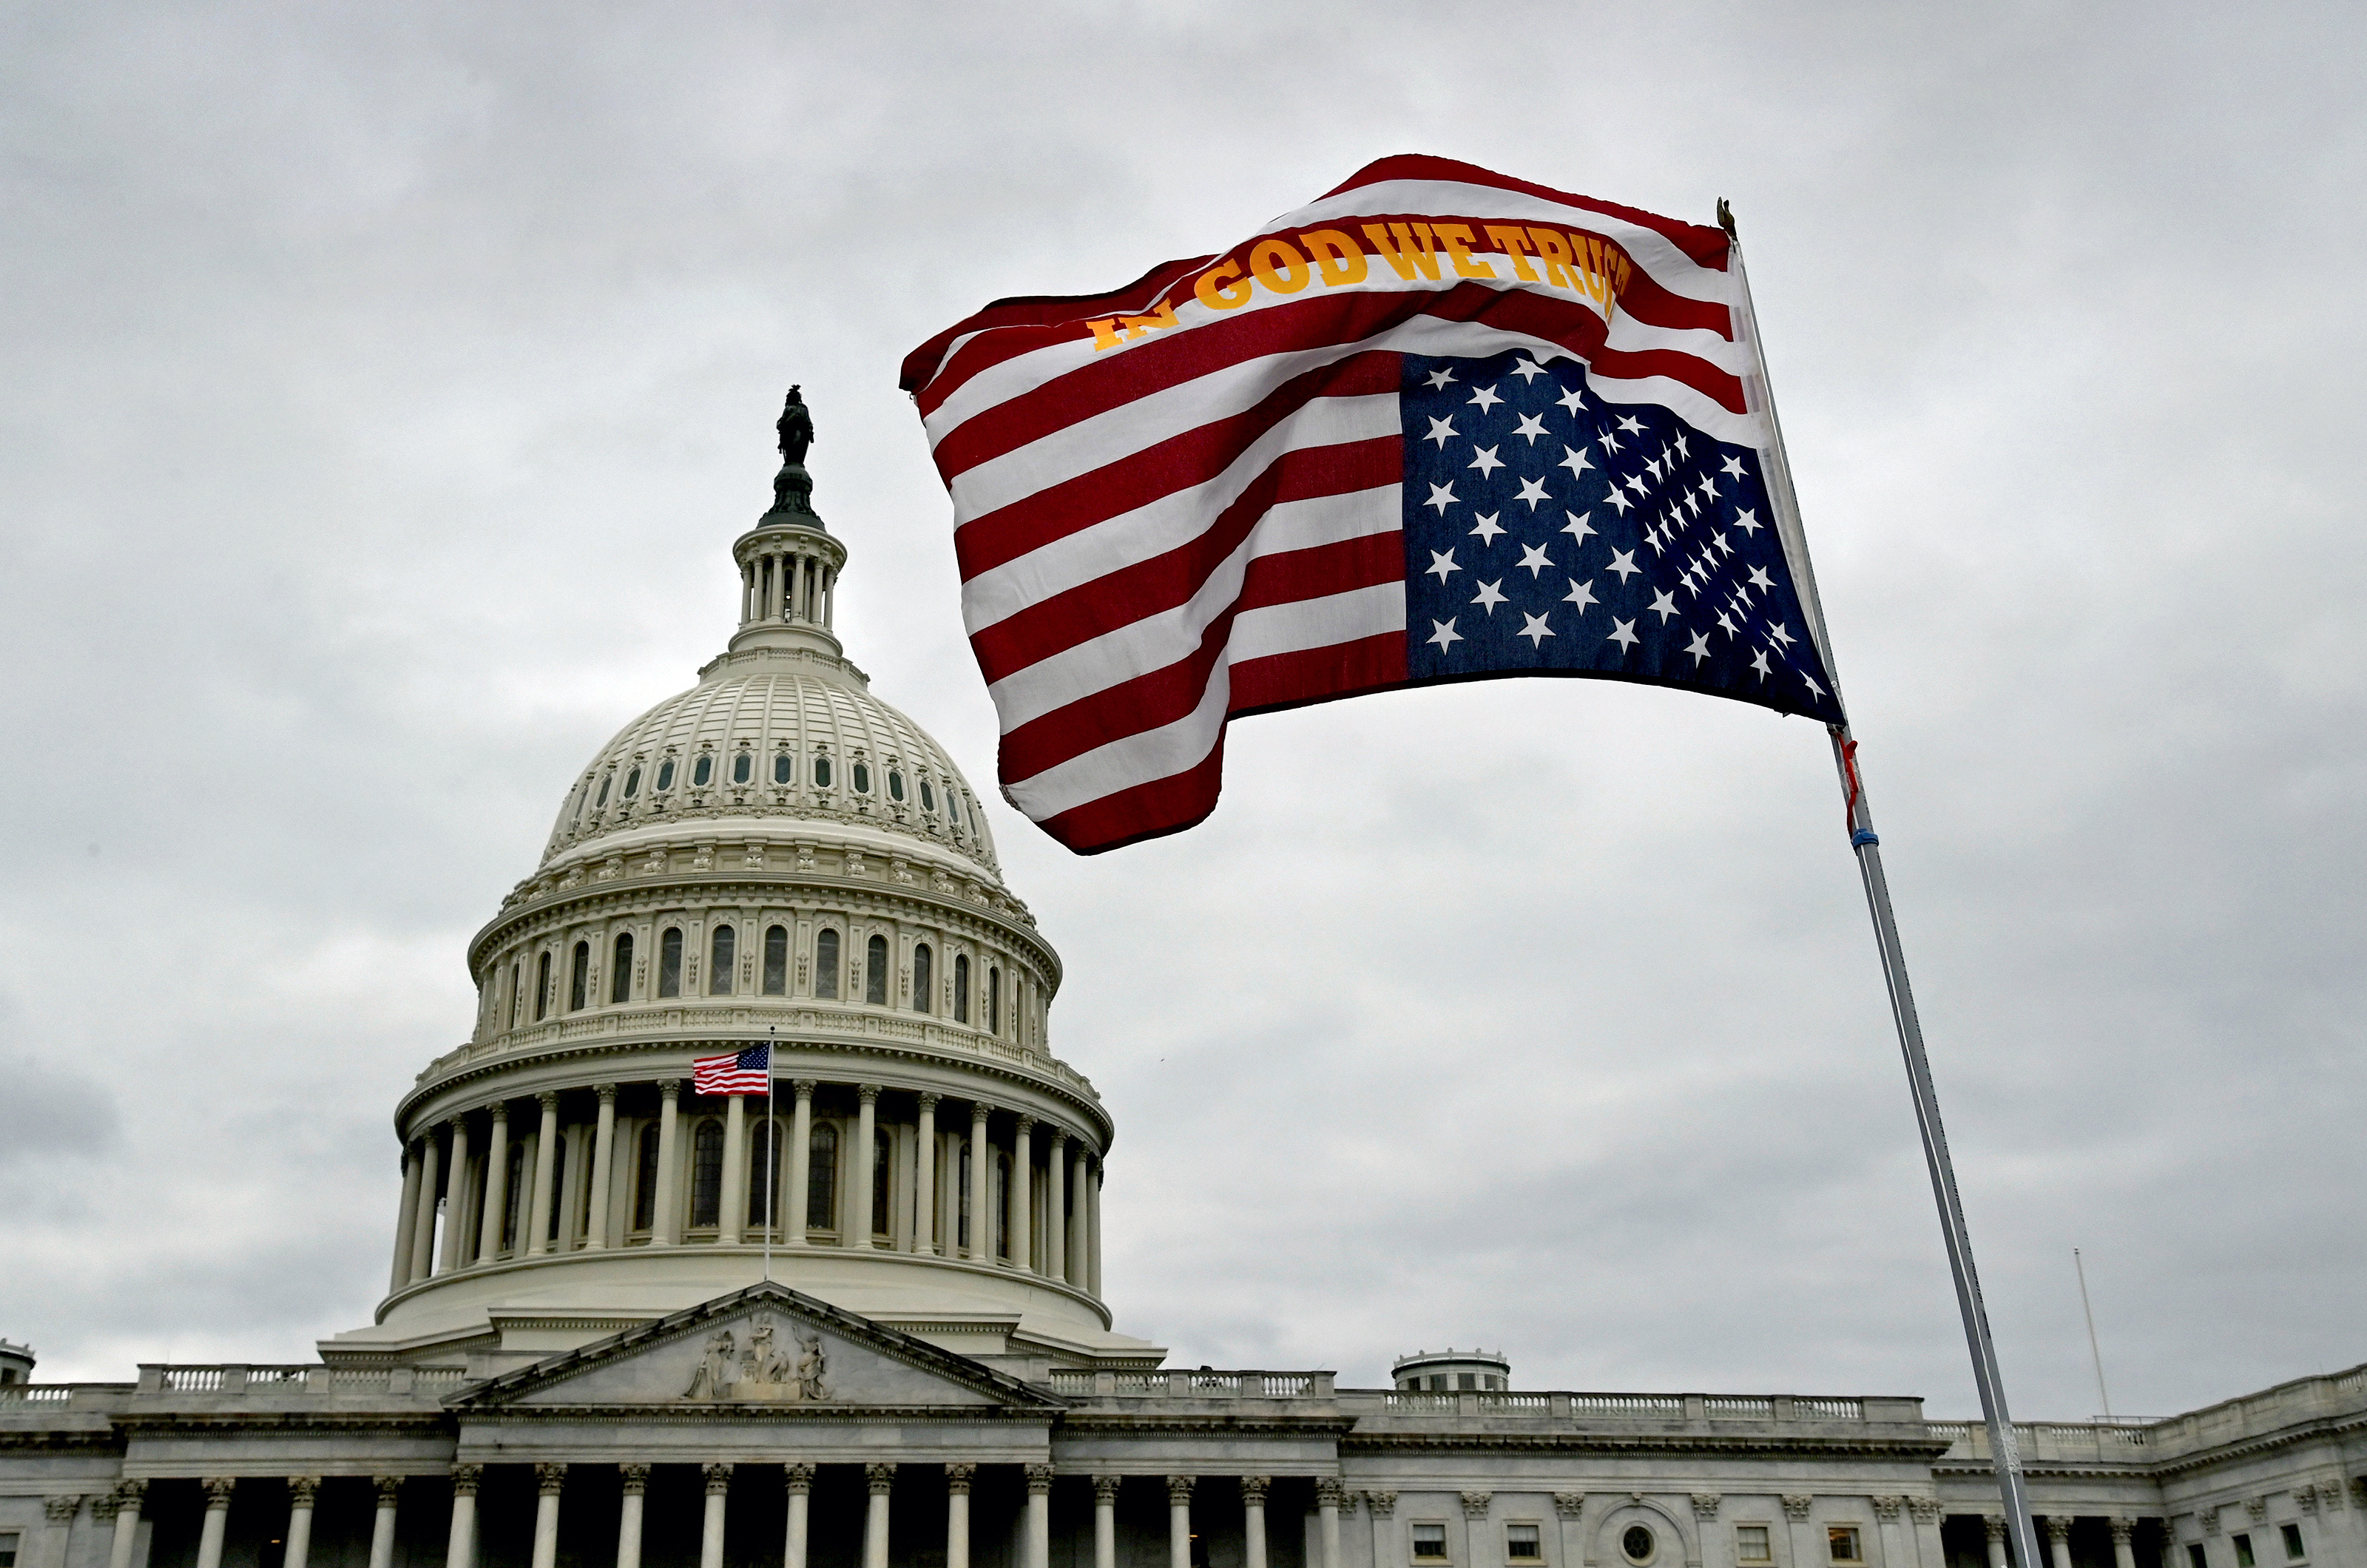 Flag in distress outside U.S. Capitol